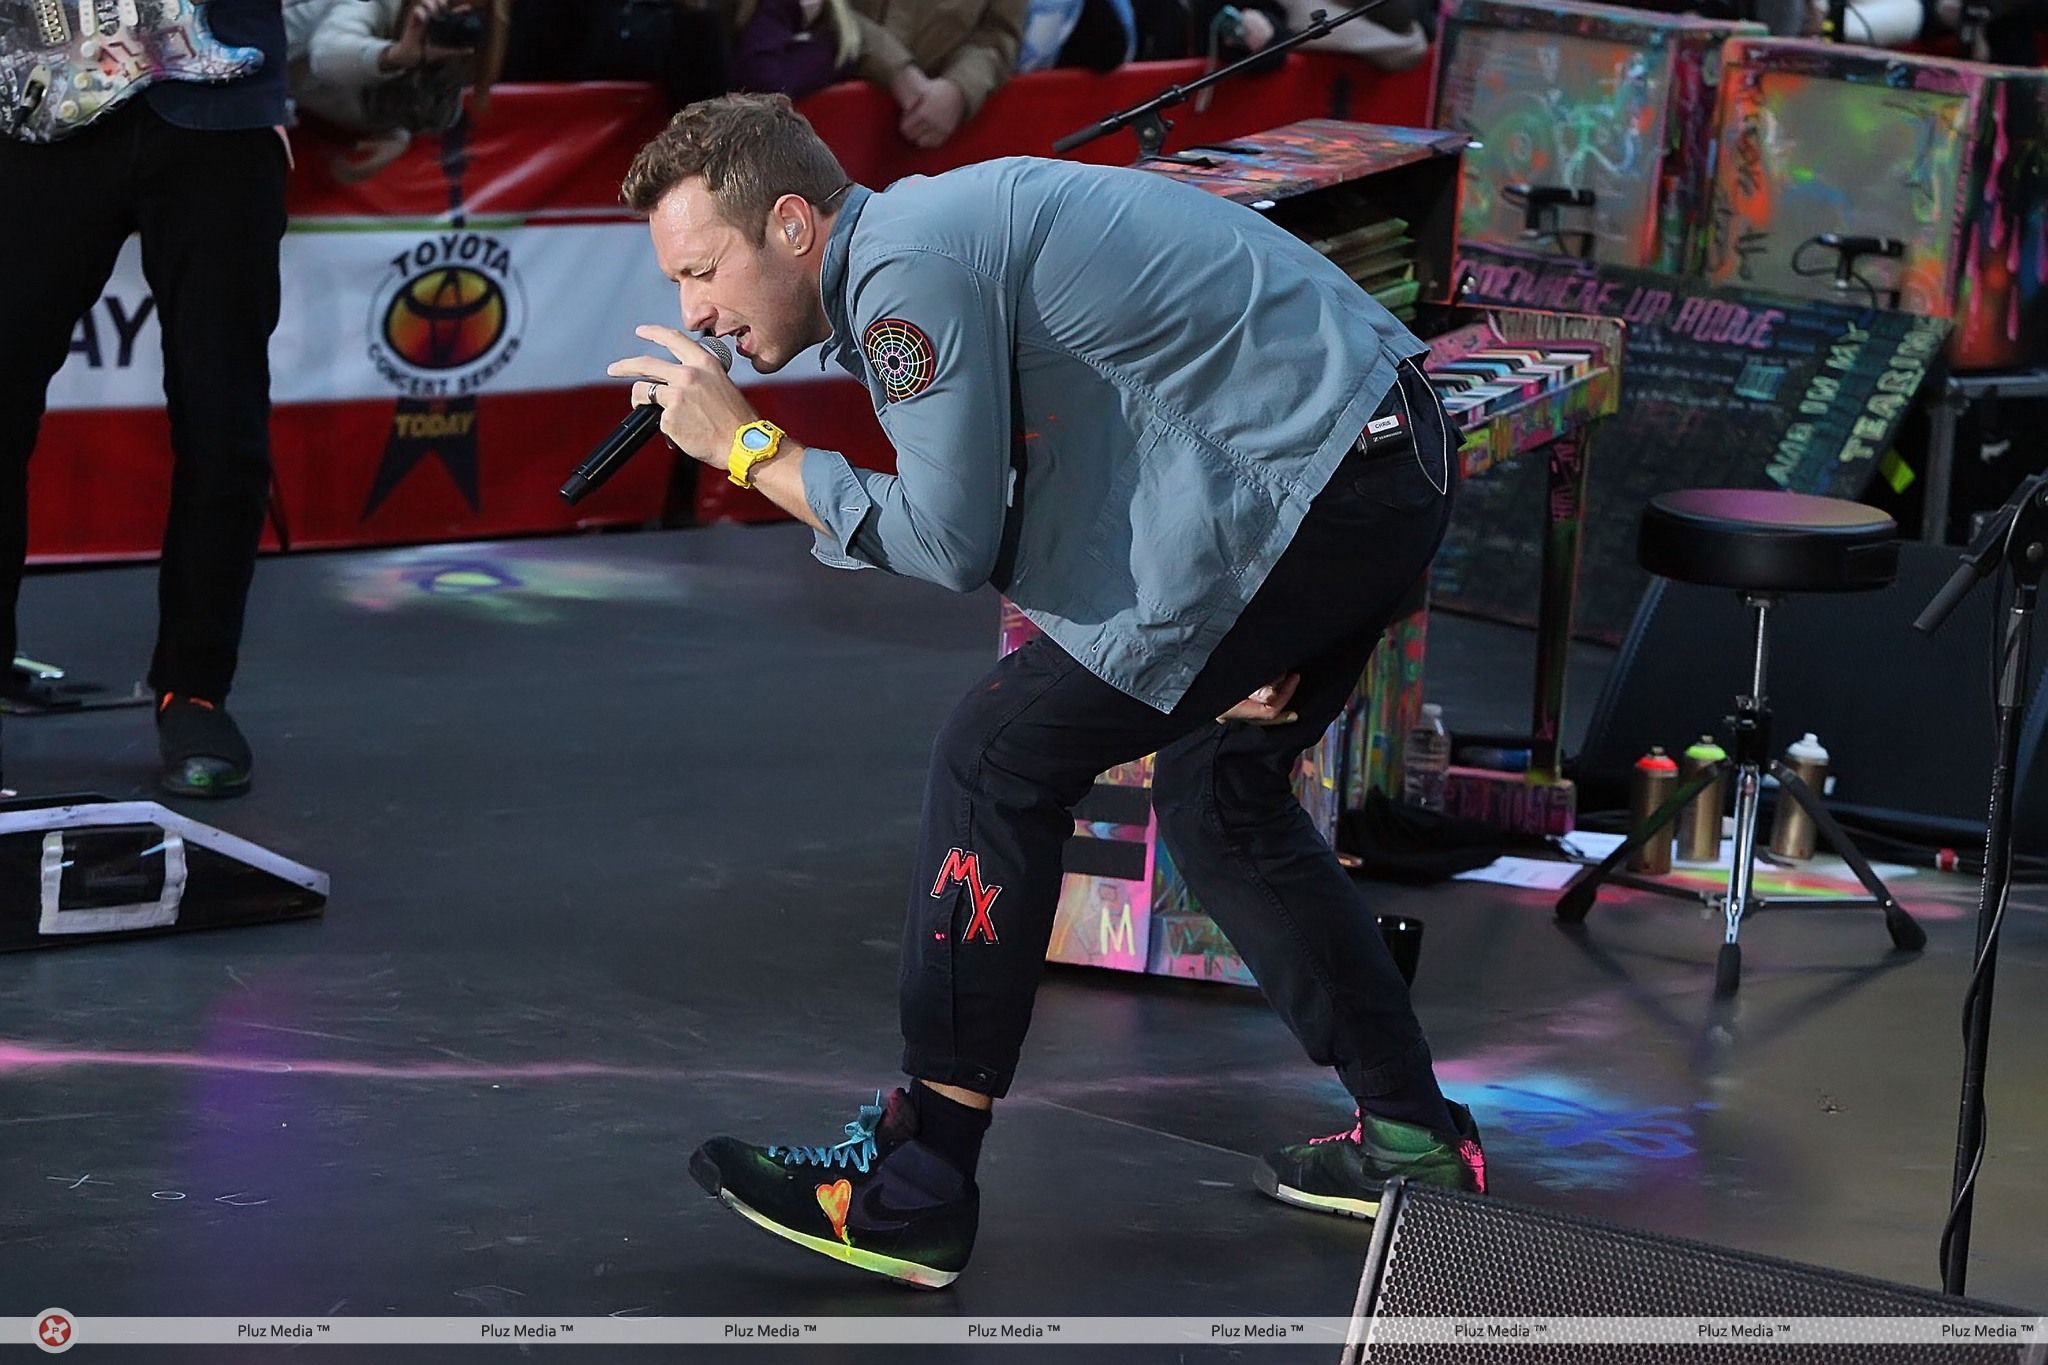 Chris Martin performing live on the 'Today' show as part of their Toyota Concert Series | Picture 107164